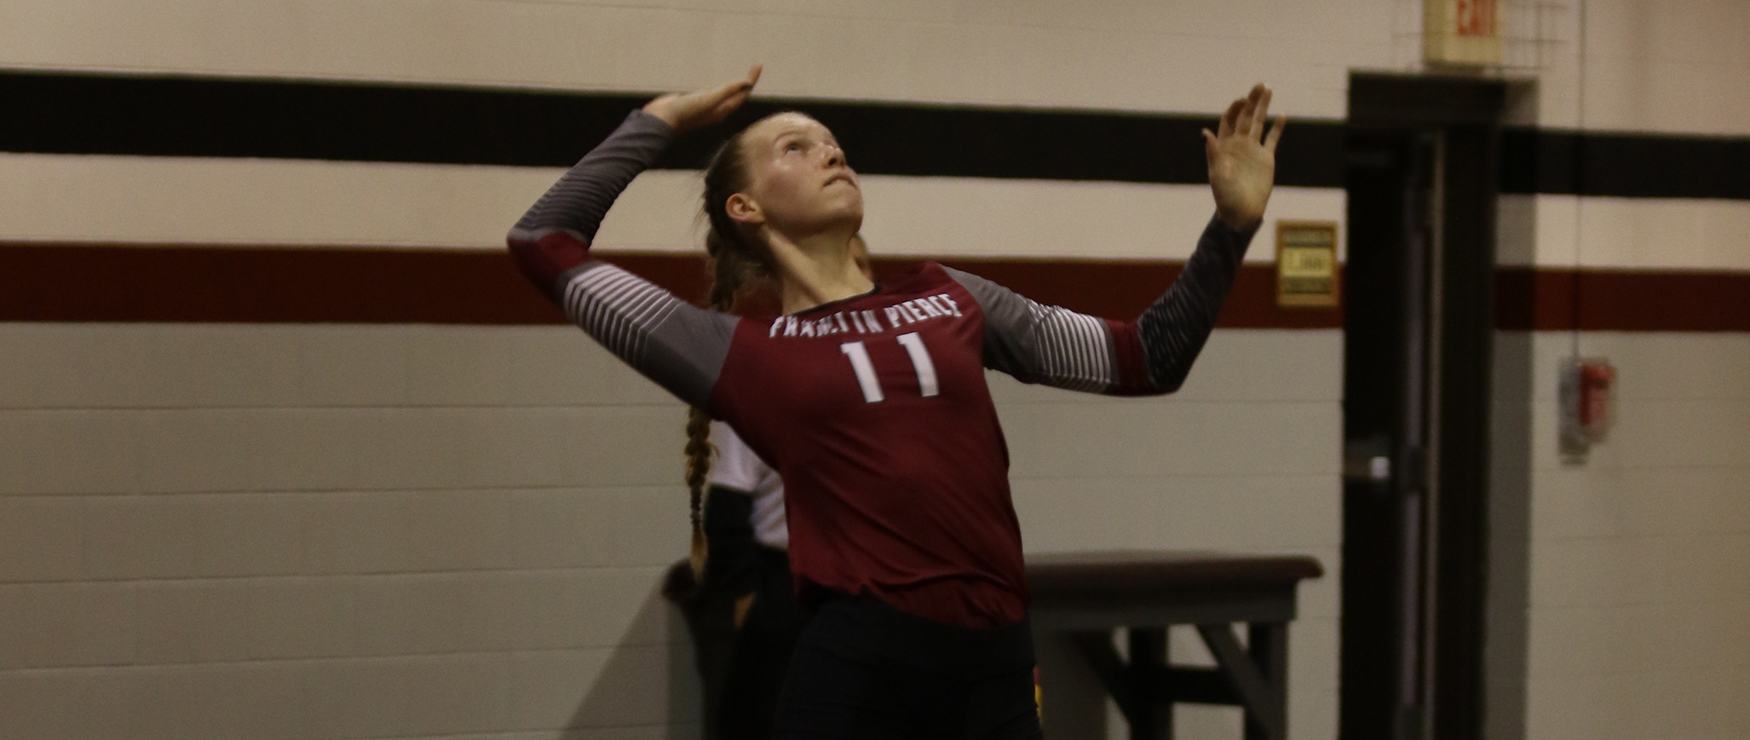 St. Jean, Varricchio Go Big as Volleyball Rallies for 3-2 Win Over Assumption